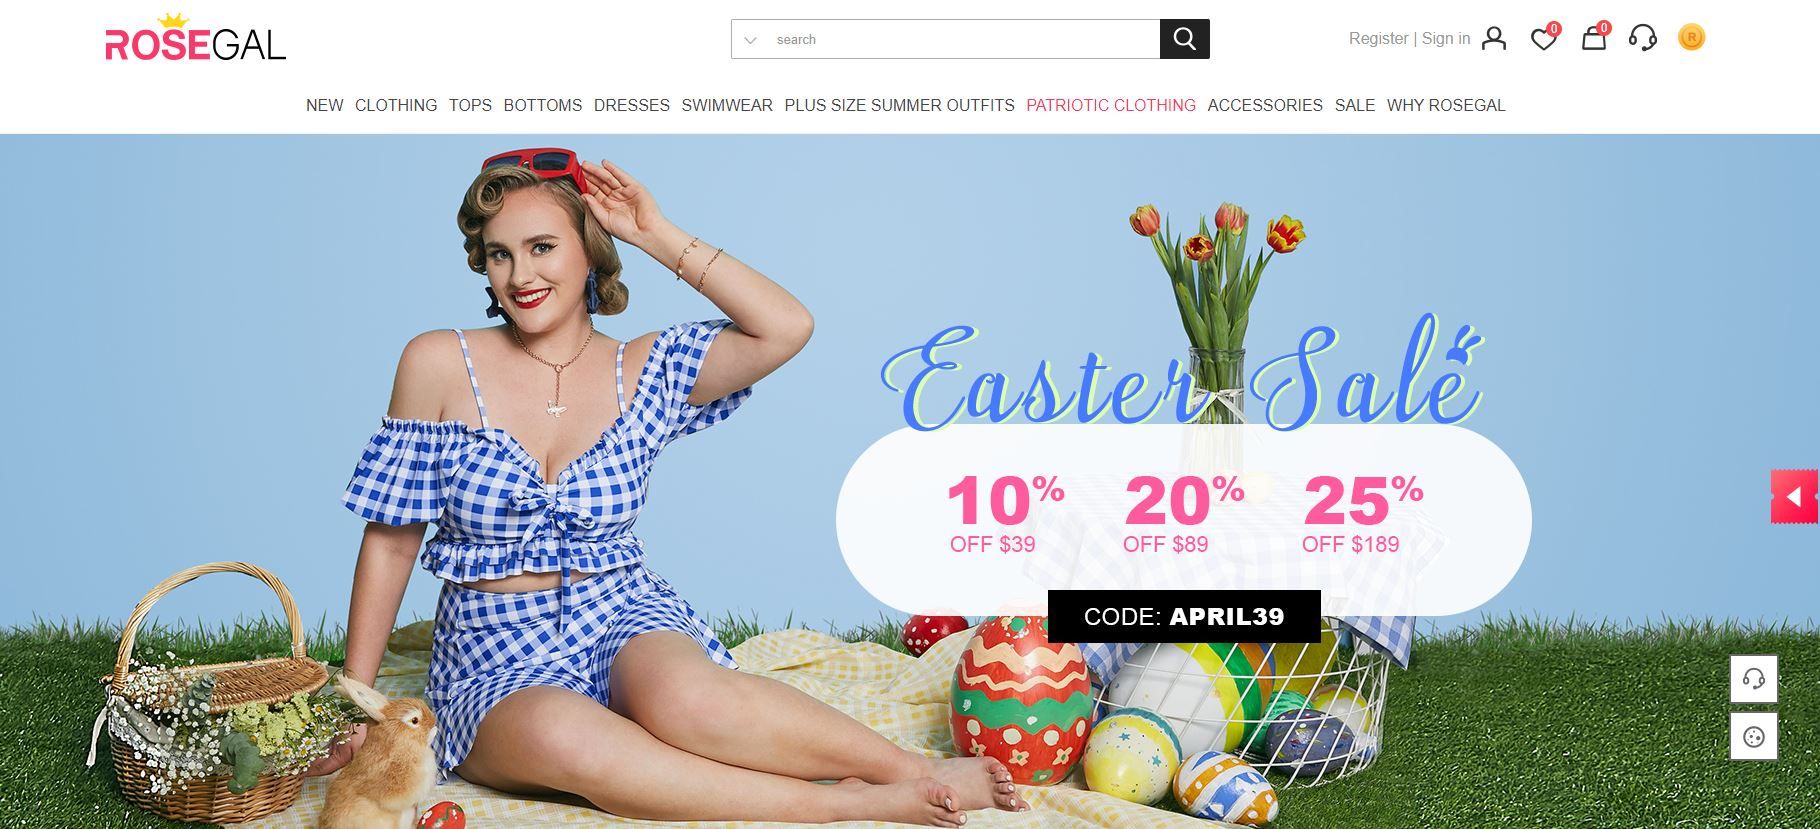 41+ Online Store & Websites Like SHEIN To Shop Cheap Trendy